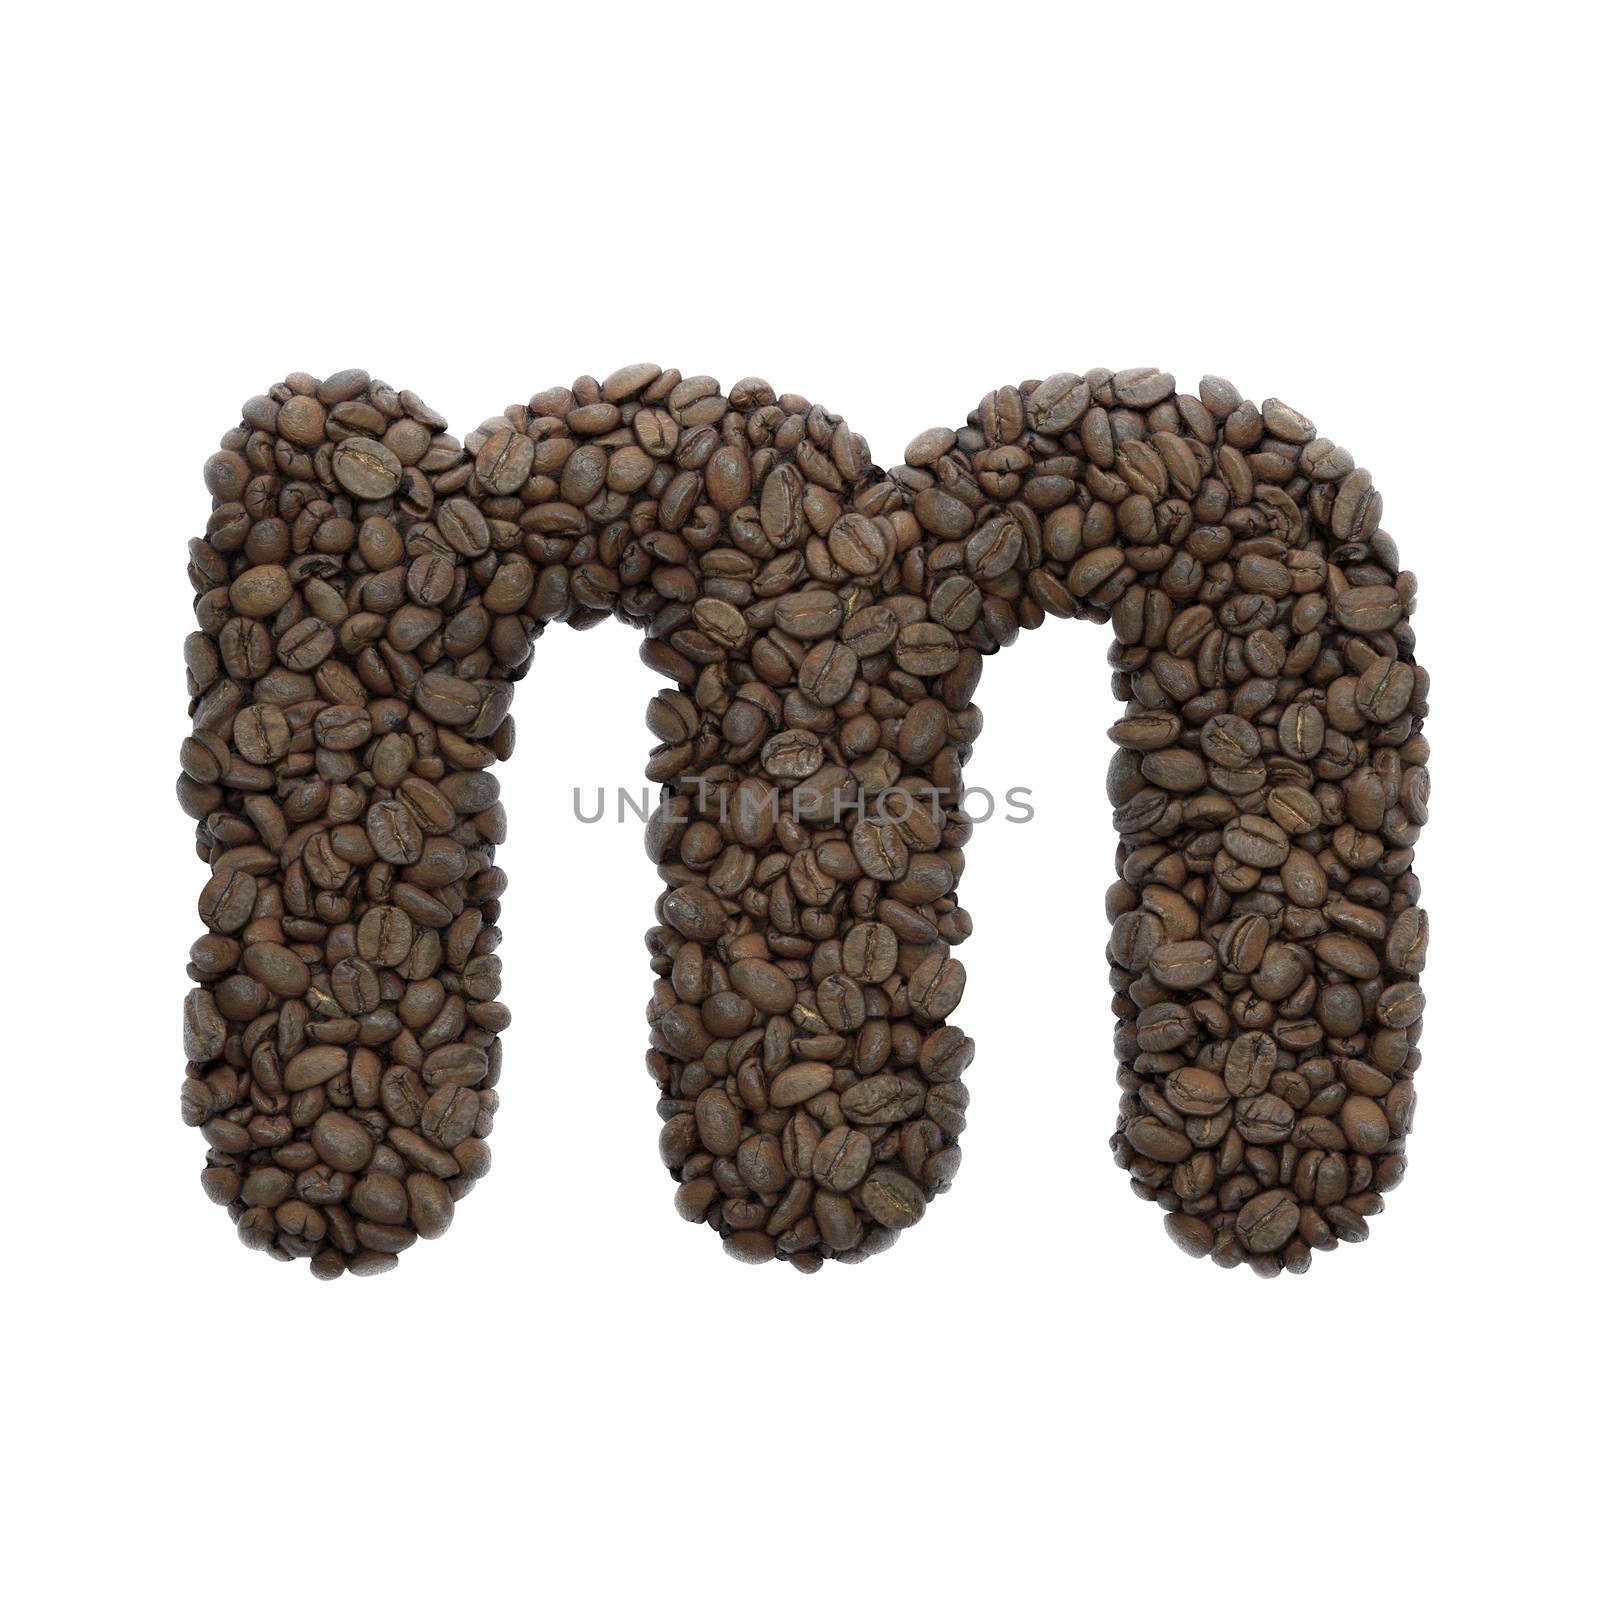 Coffee letter M - Small 3d roasted beans font isolated on white background. This alphabet is perfect for creative illustrations related but not limited to Coffee, energy, insomnia...